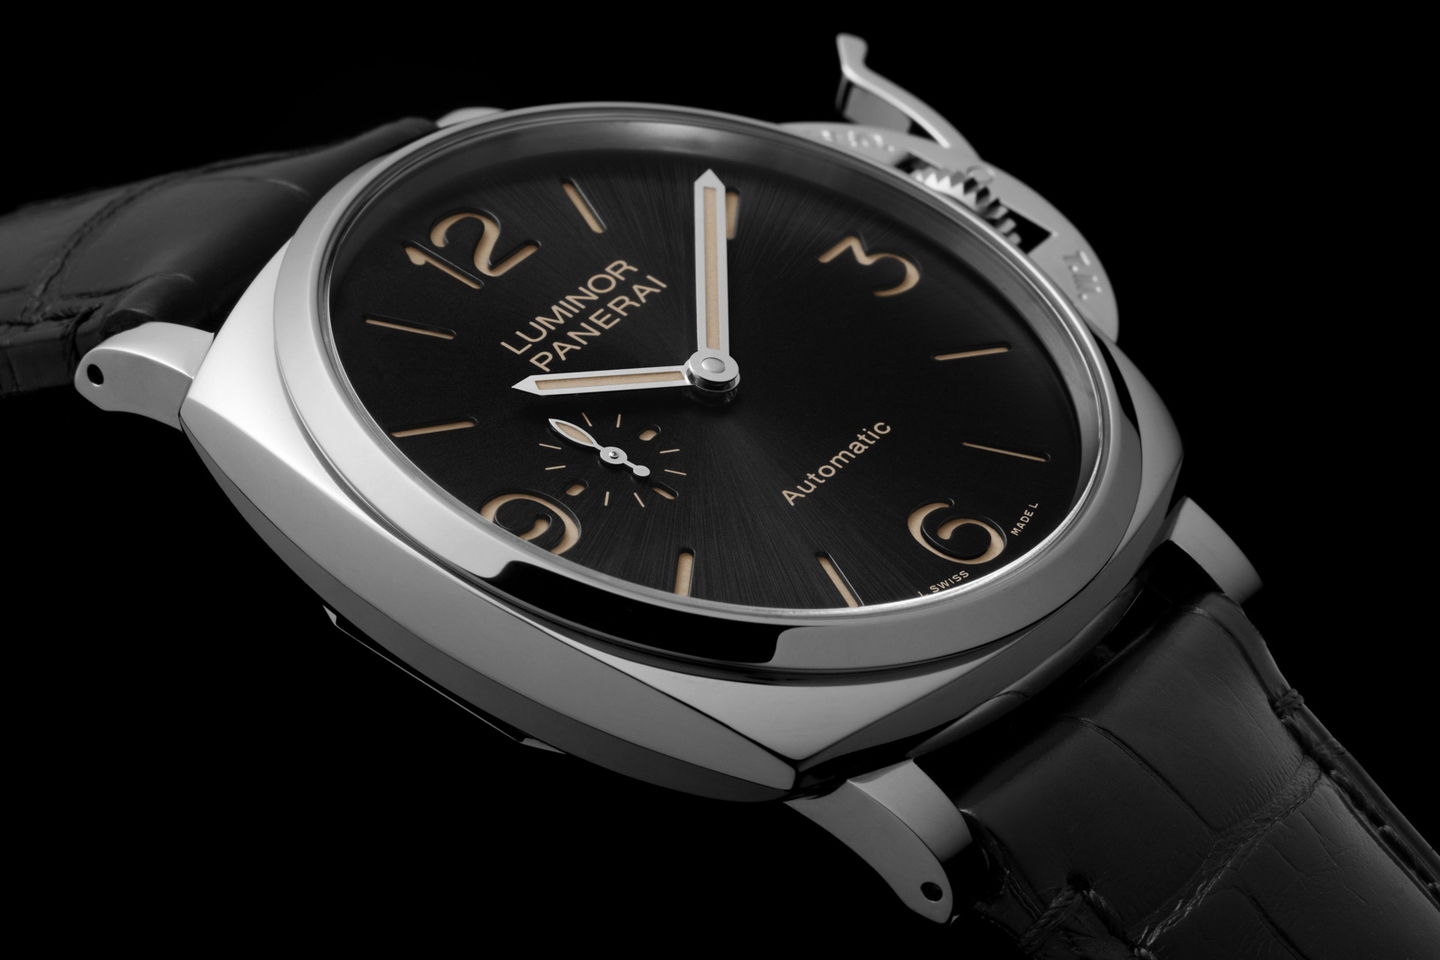 Panerai unveiled new Luminor Due collection